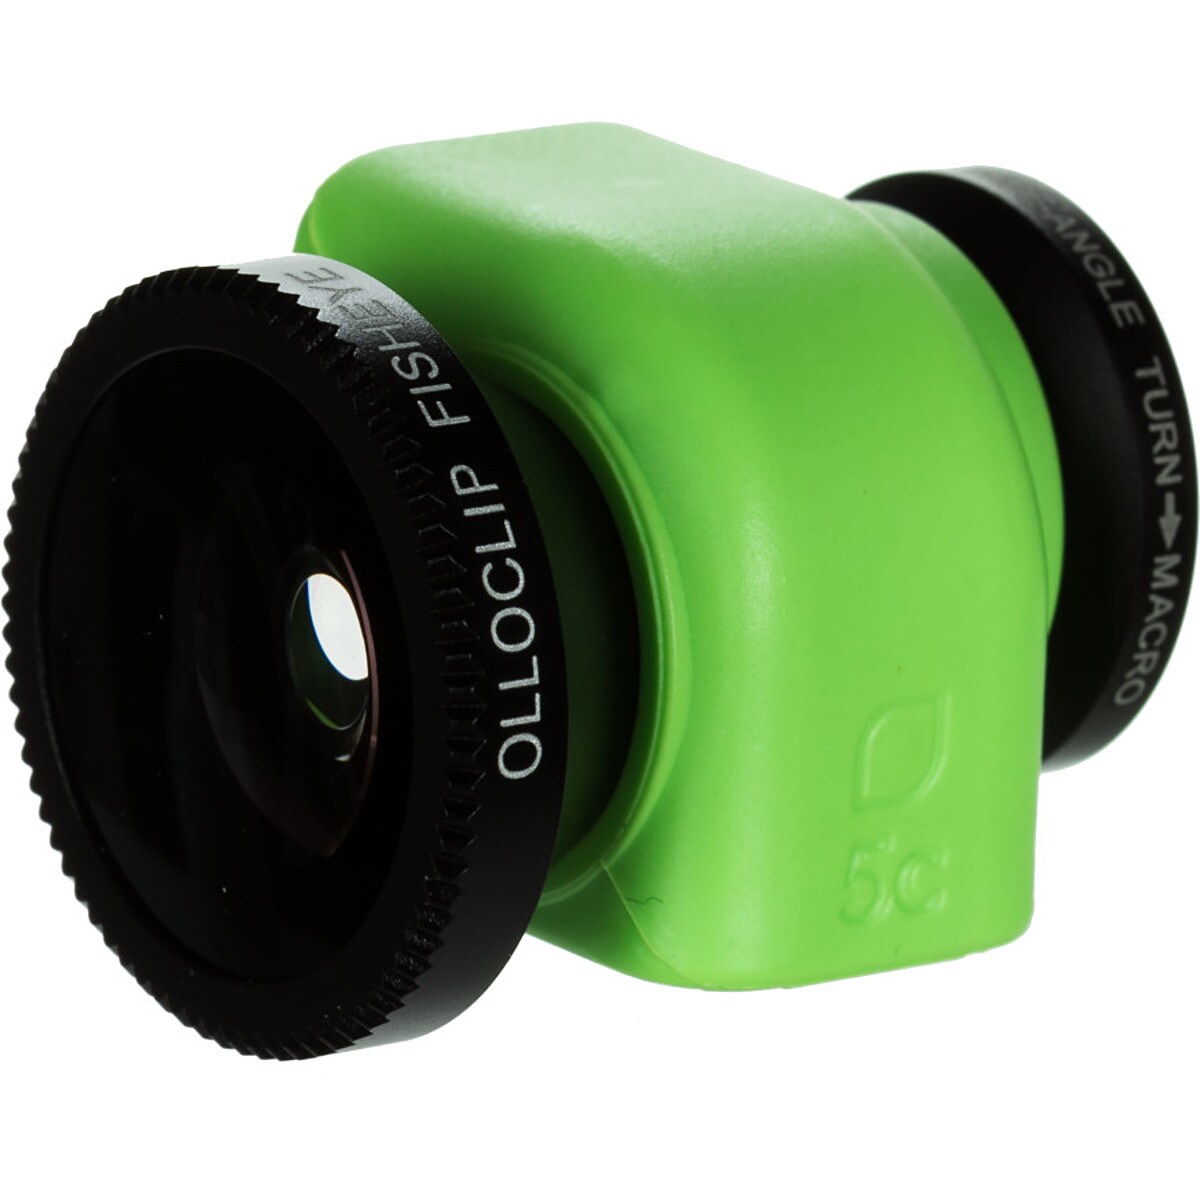 olloclip 3-in-1 Lens - iPhone 5c Black Lens\/Green Clip, One Size